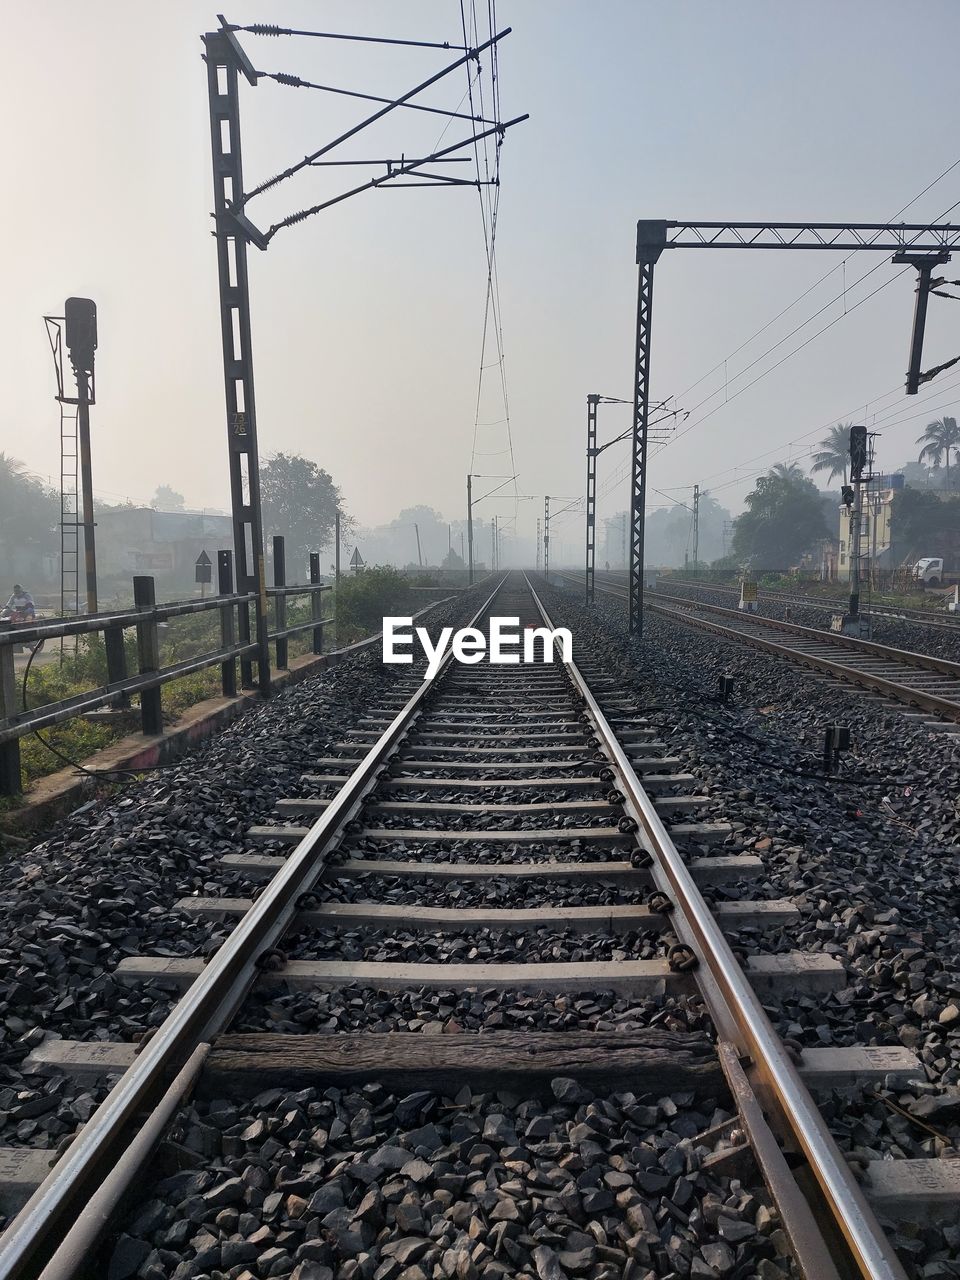 electricity, architecture, transport, line, built structure, nature, no people, transportation, urban area, track, sky, day, technology, outdoors, cable, city, building exterior, business finance and industry, railroad track